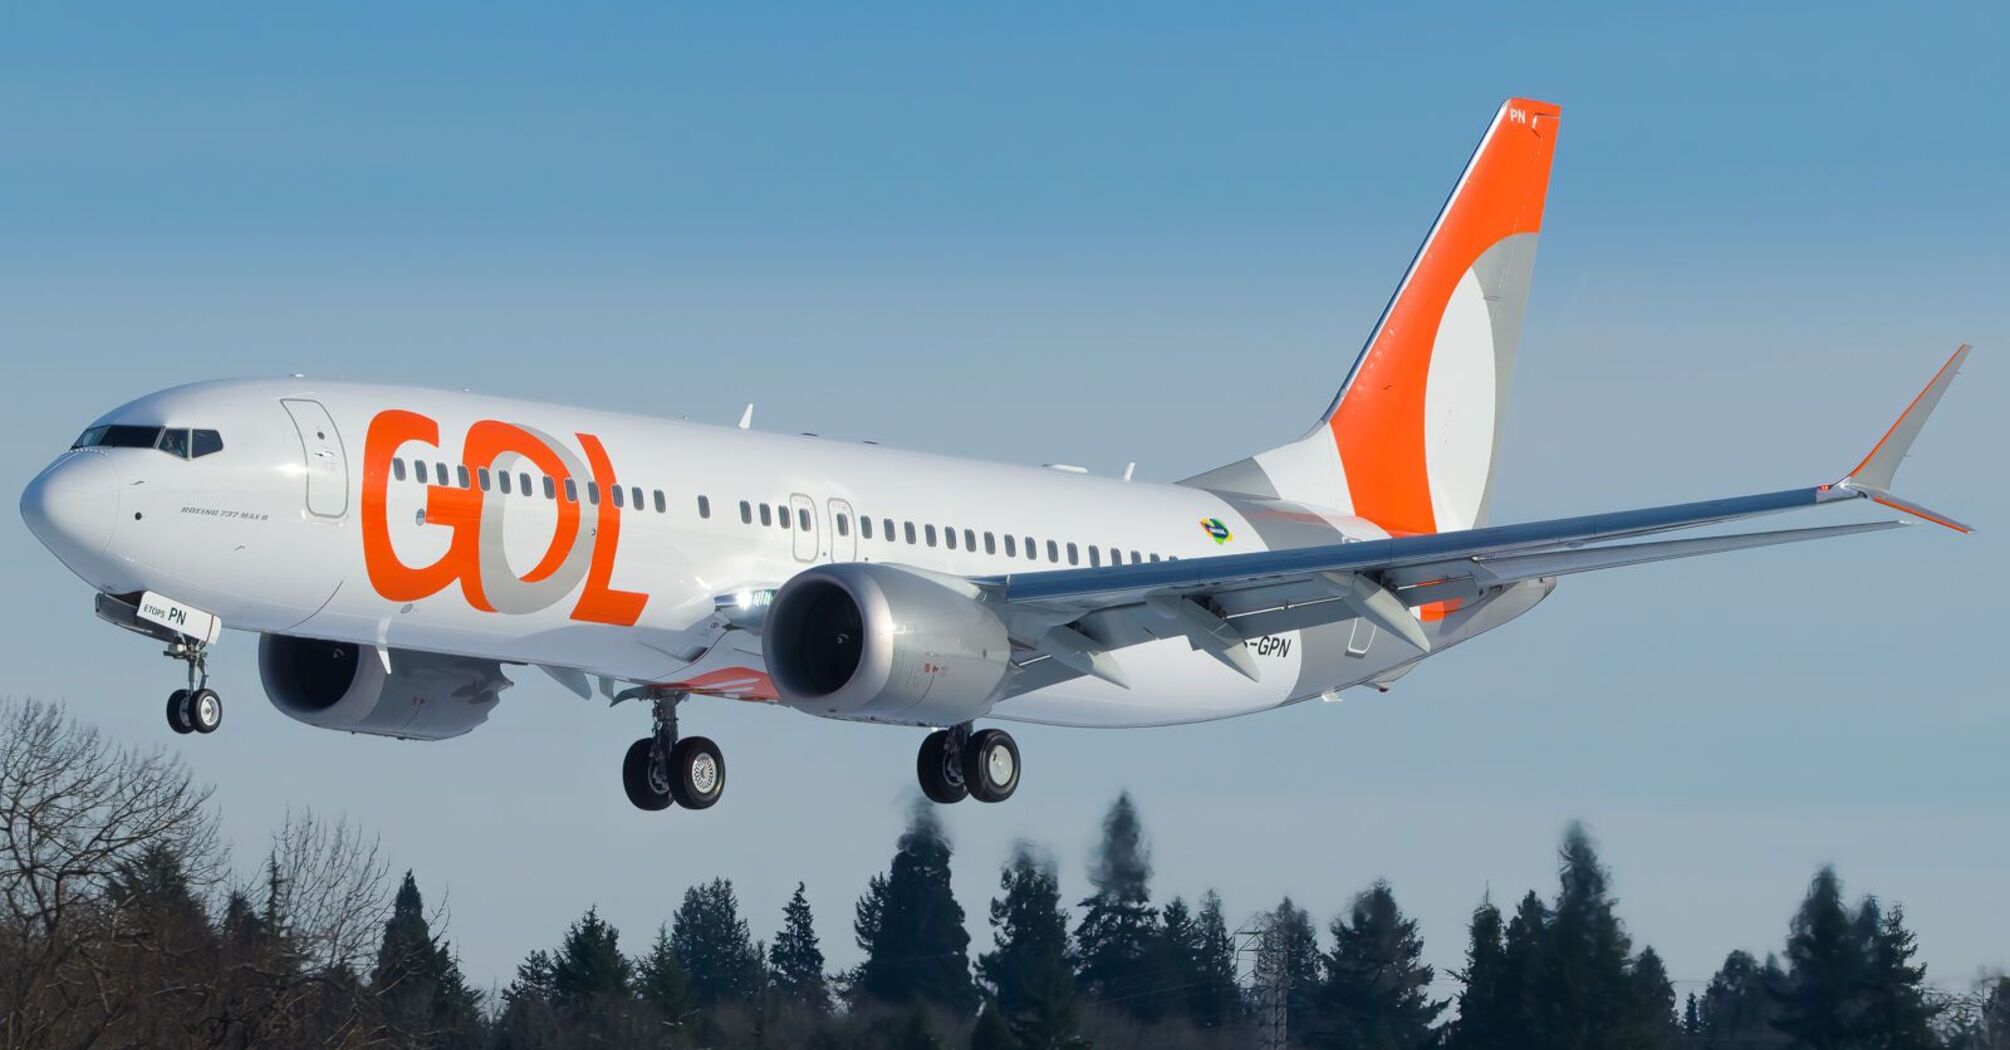 Gol Airlines Compensation for Delayed or Cancelled Flights